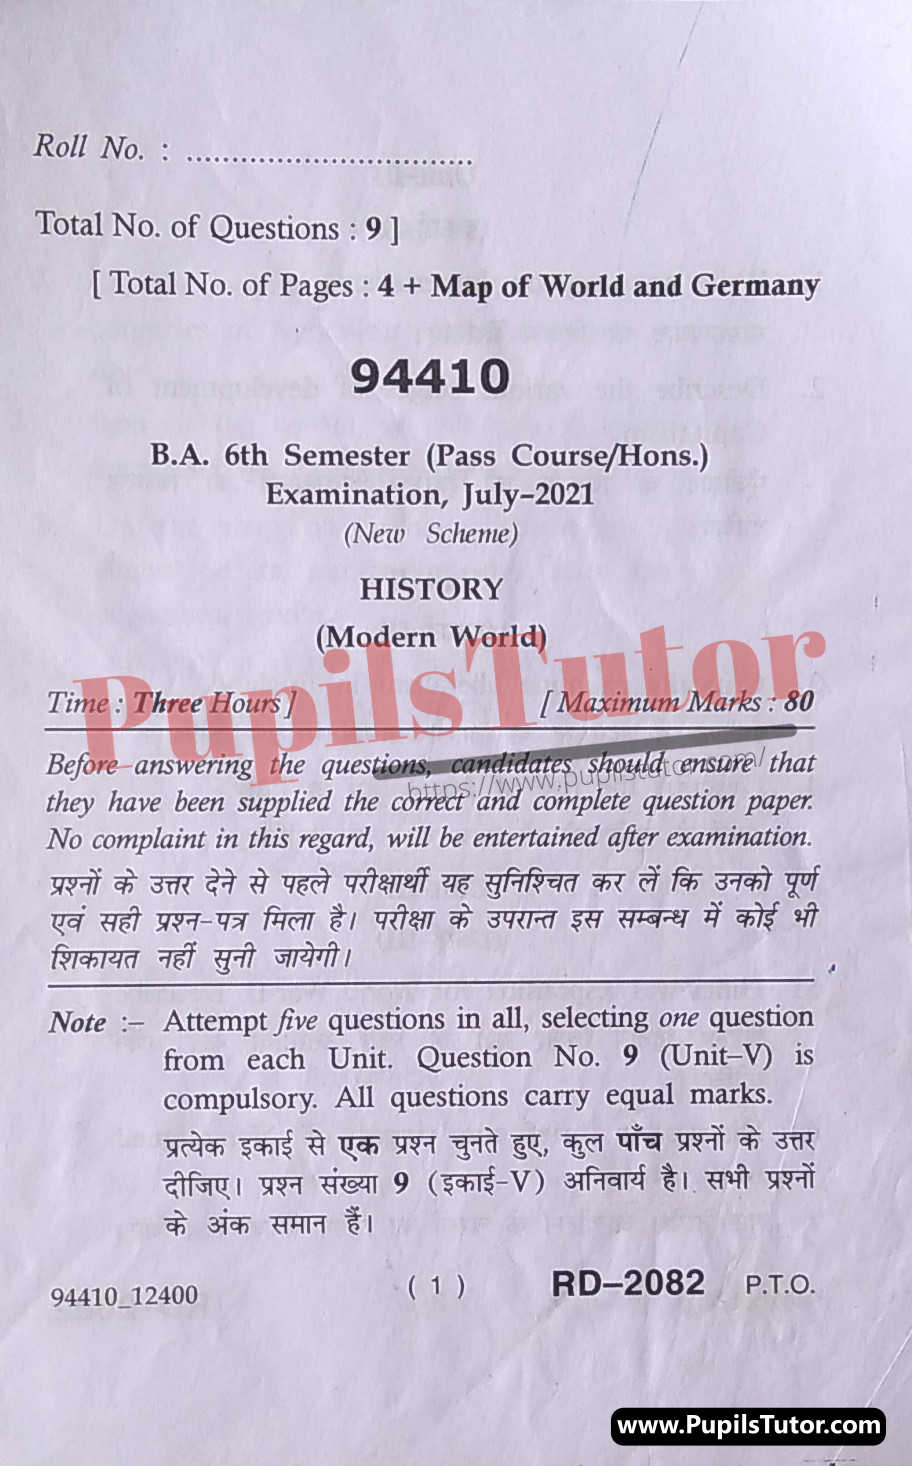 MDU (Maharshi Dayanand University, Rohtak Haryana) BA Pass Course And Honors Sixth Semester Previous Year History Question Paper For July, 2021 Exam (Question Paper Page 1) - pupilstutor.com